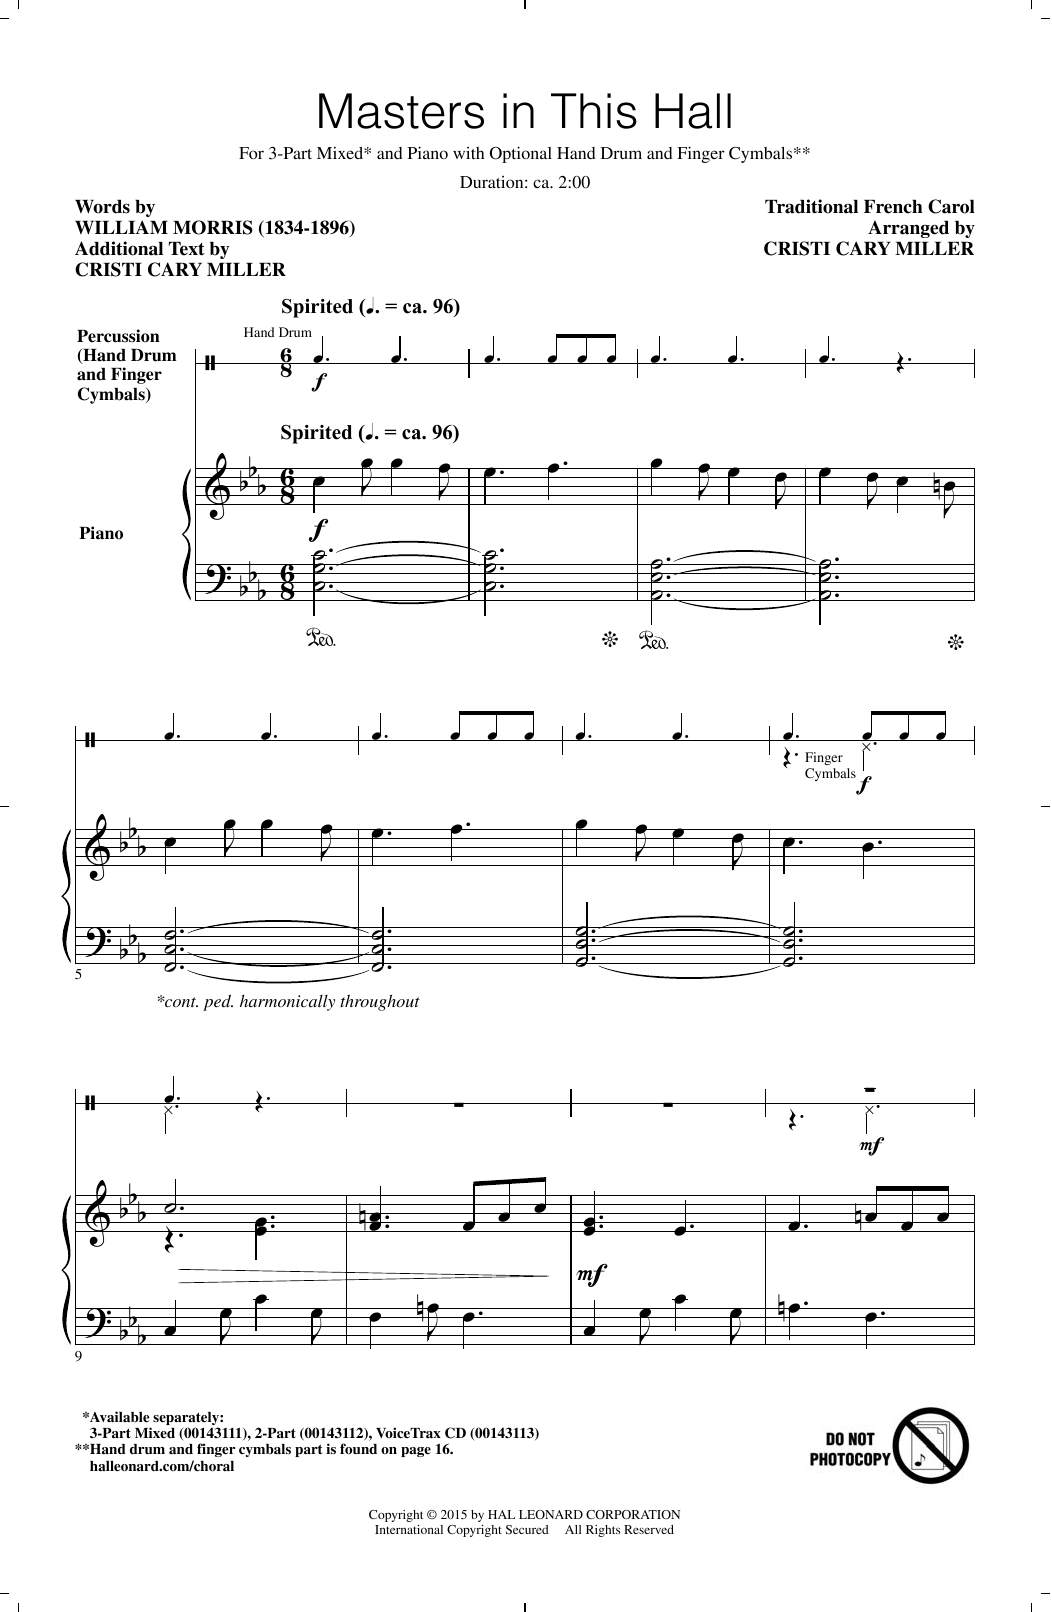 Download Cristi Cary Miller Masters In This Hall Sheet Music